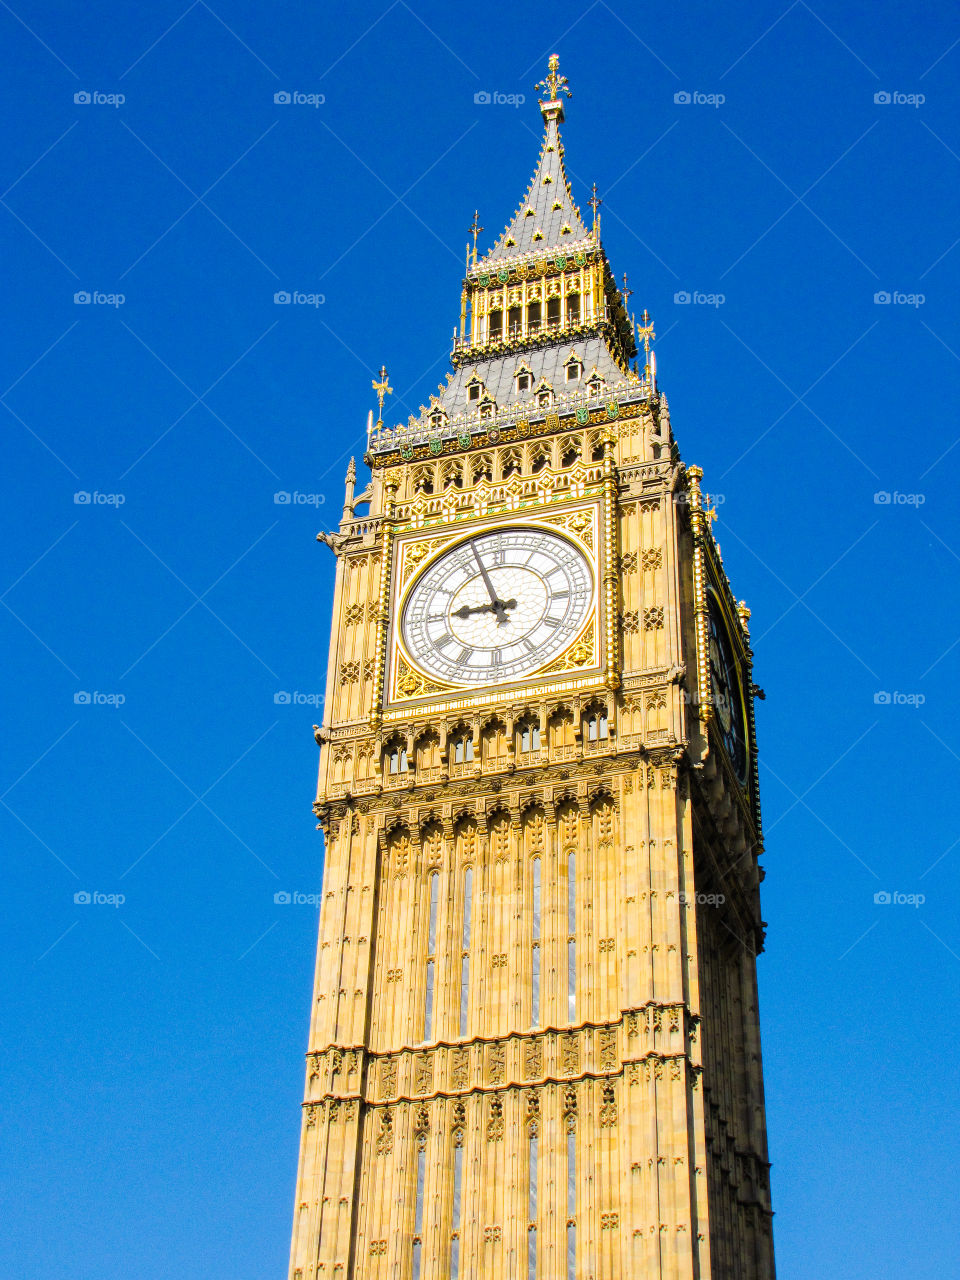 Big Ben clock tower in London against a blue sky